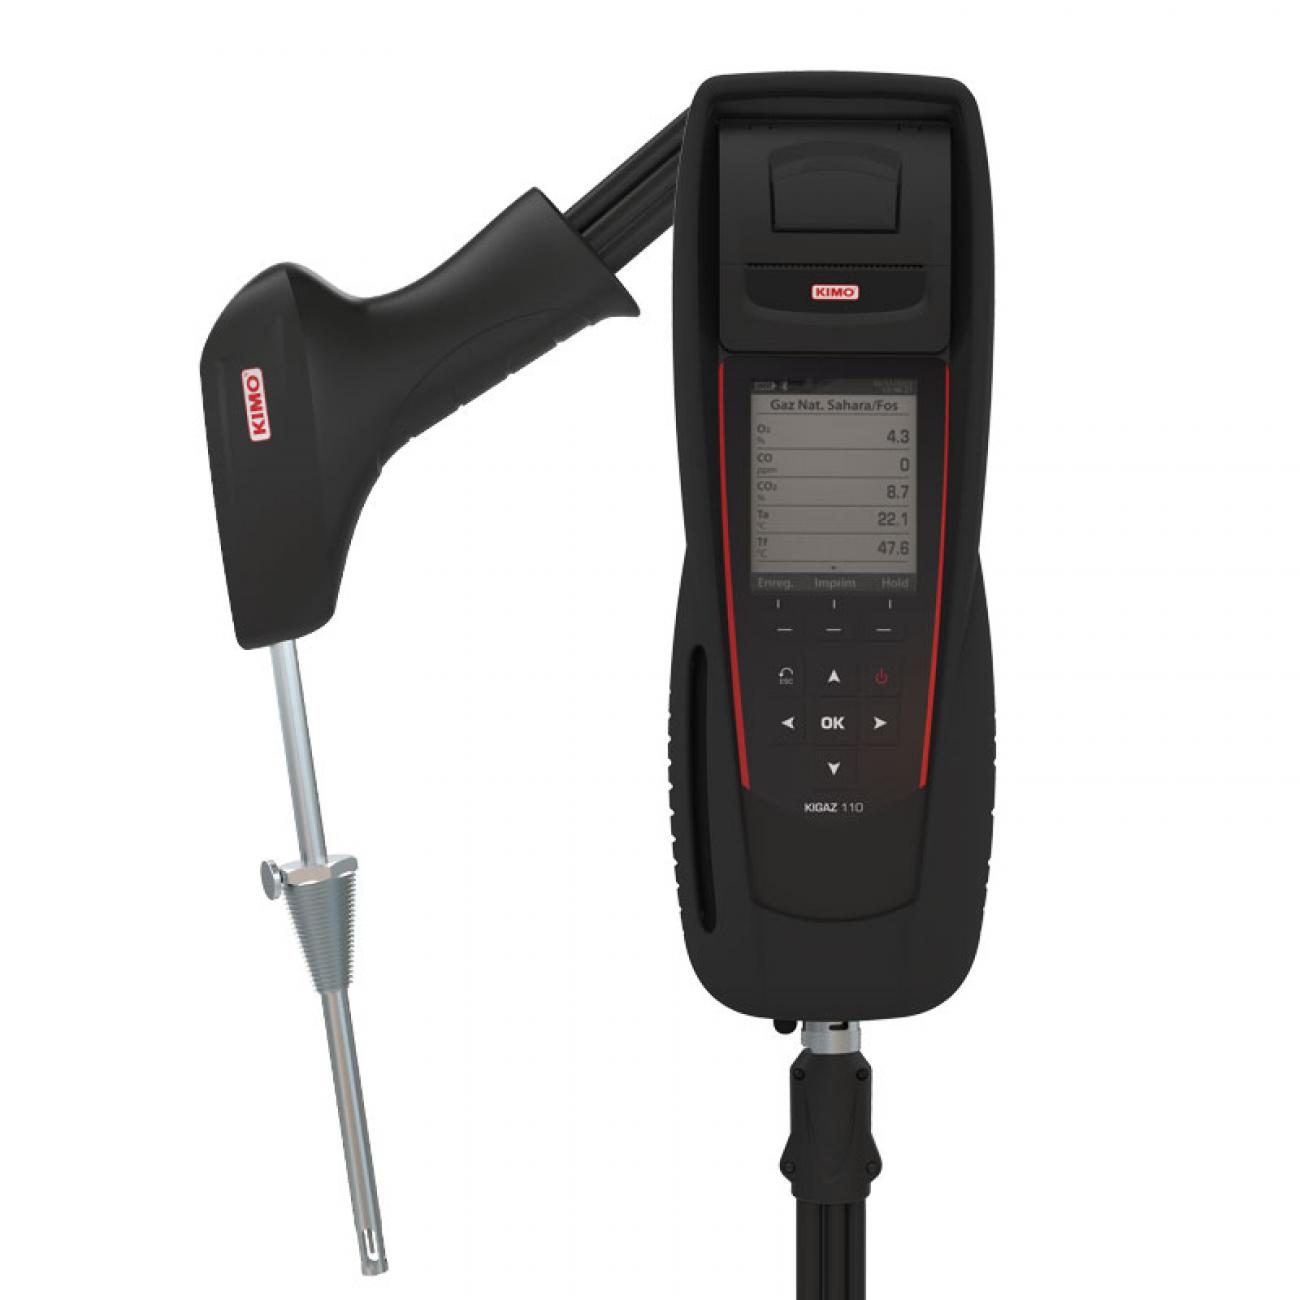 KIGAZ 110 Combustion gas analyser